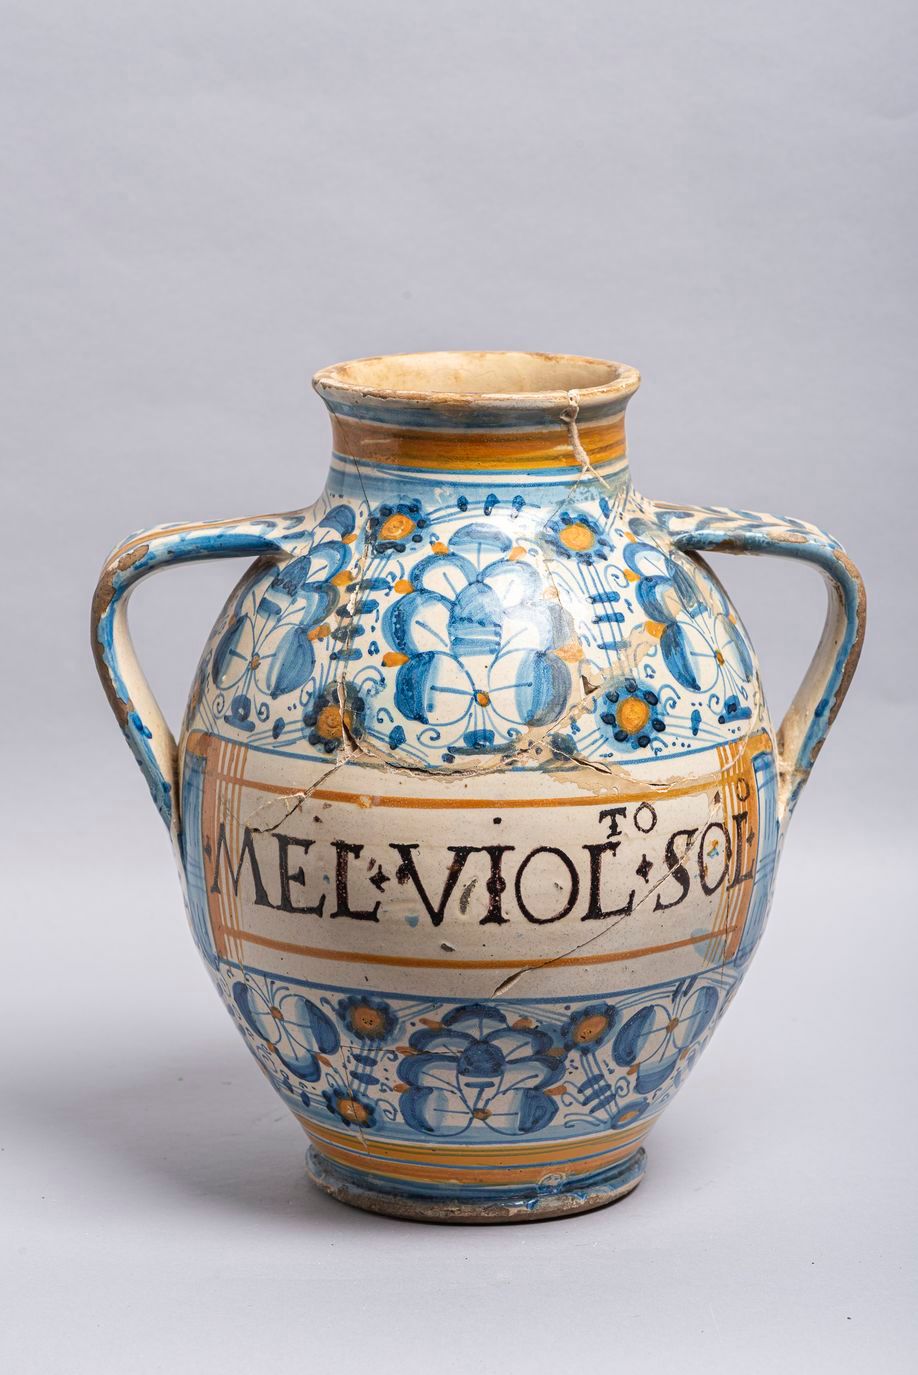 Null 33. Montelupo earthenware medicine jar, late 16th century, two-handled mode&hellip;